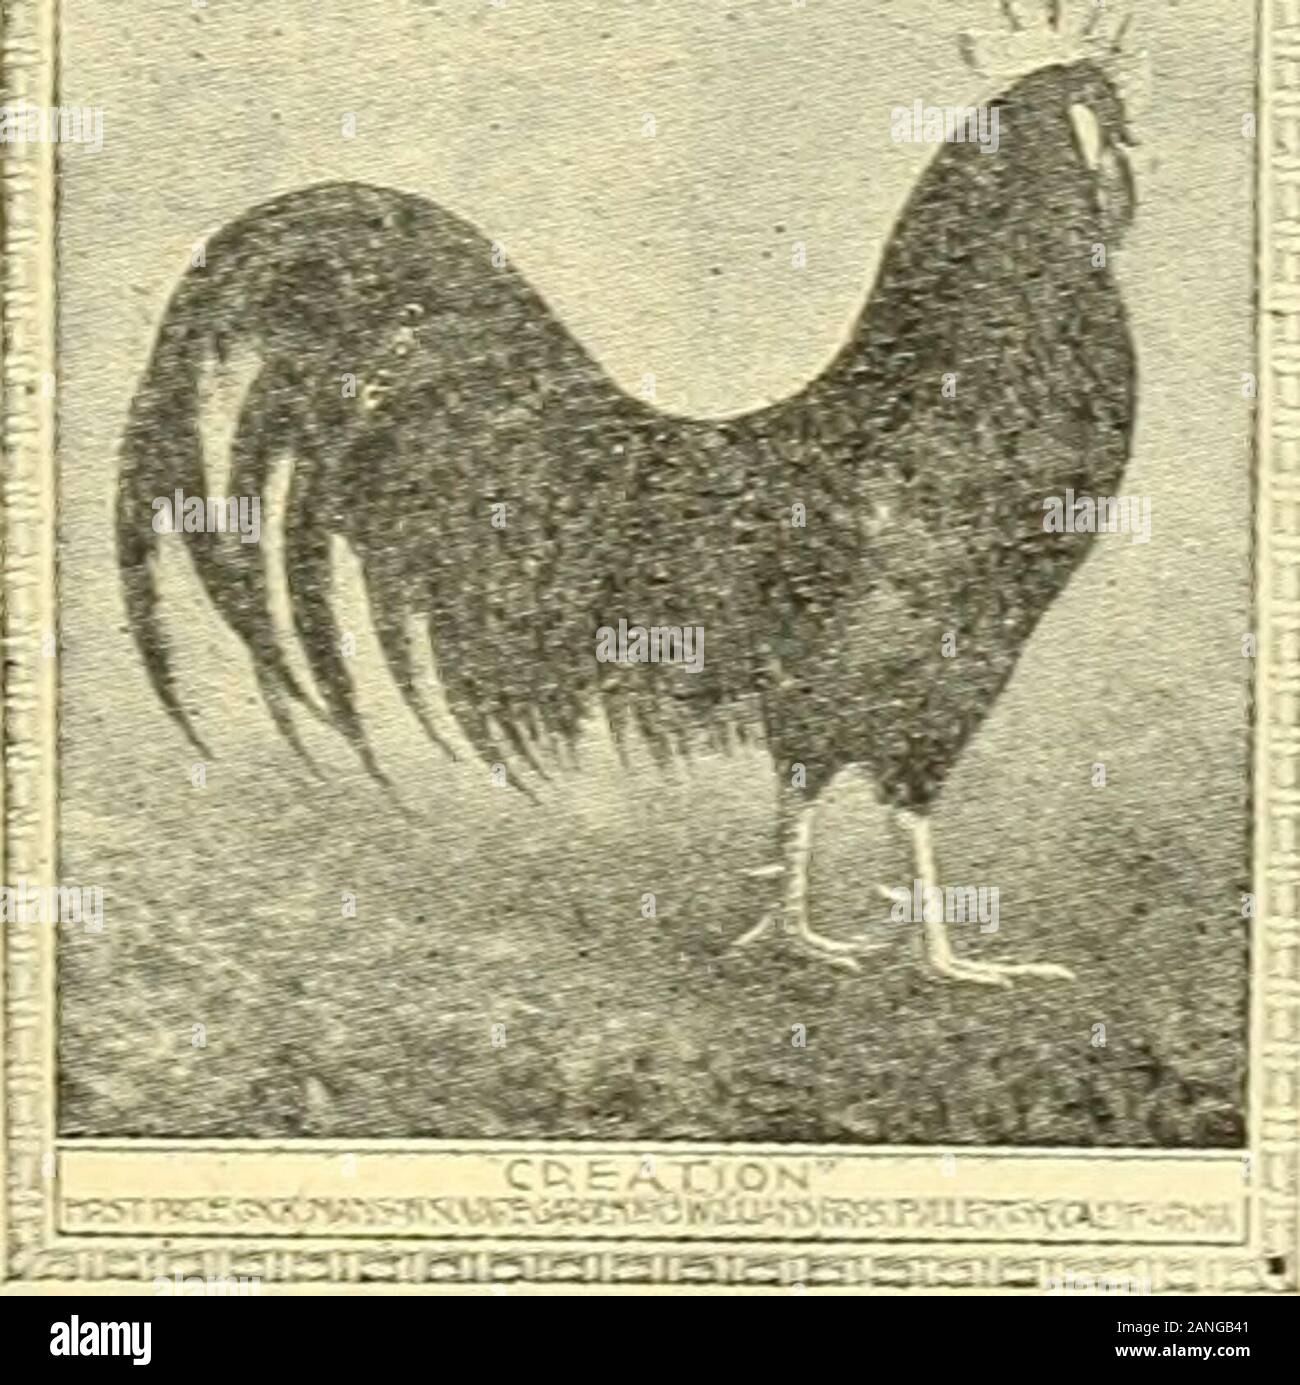 American poultry world . ILDER, HEALTH TOXINE Used by over 80.000 Poultry Raisers. Over OneMillion* Bags sold in 1914. 300 lbs. for One Dollar Send for Samples and Analysis.ARTHUR W. BISHOP, PATERSON, N J A MILLION HENS USE WELLCOMES FAMOUS TRAPNEST Shows Which Hen Laid The Egg.New Principle 100 Per Cent. Efficient F. O. Wellcome, Box W, Yarmouth, Me. Write NOW for prices and proof. All Varieties SUSSEX Eggs and stock for sale at all times. If you want a money maker and the finest table fowlknown to mankind try the Sussex.RED JACKET POULTRY FARM, W. M. Patteson, PEXX YAN, N. Y LIGHT AND DARK B Stock Photo